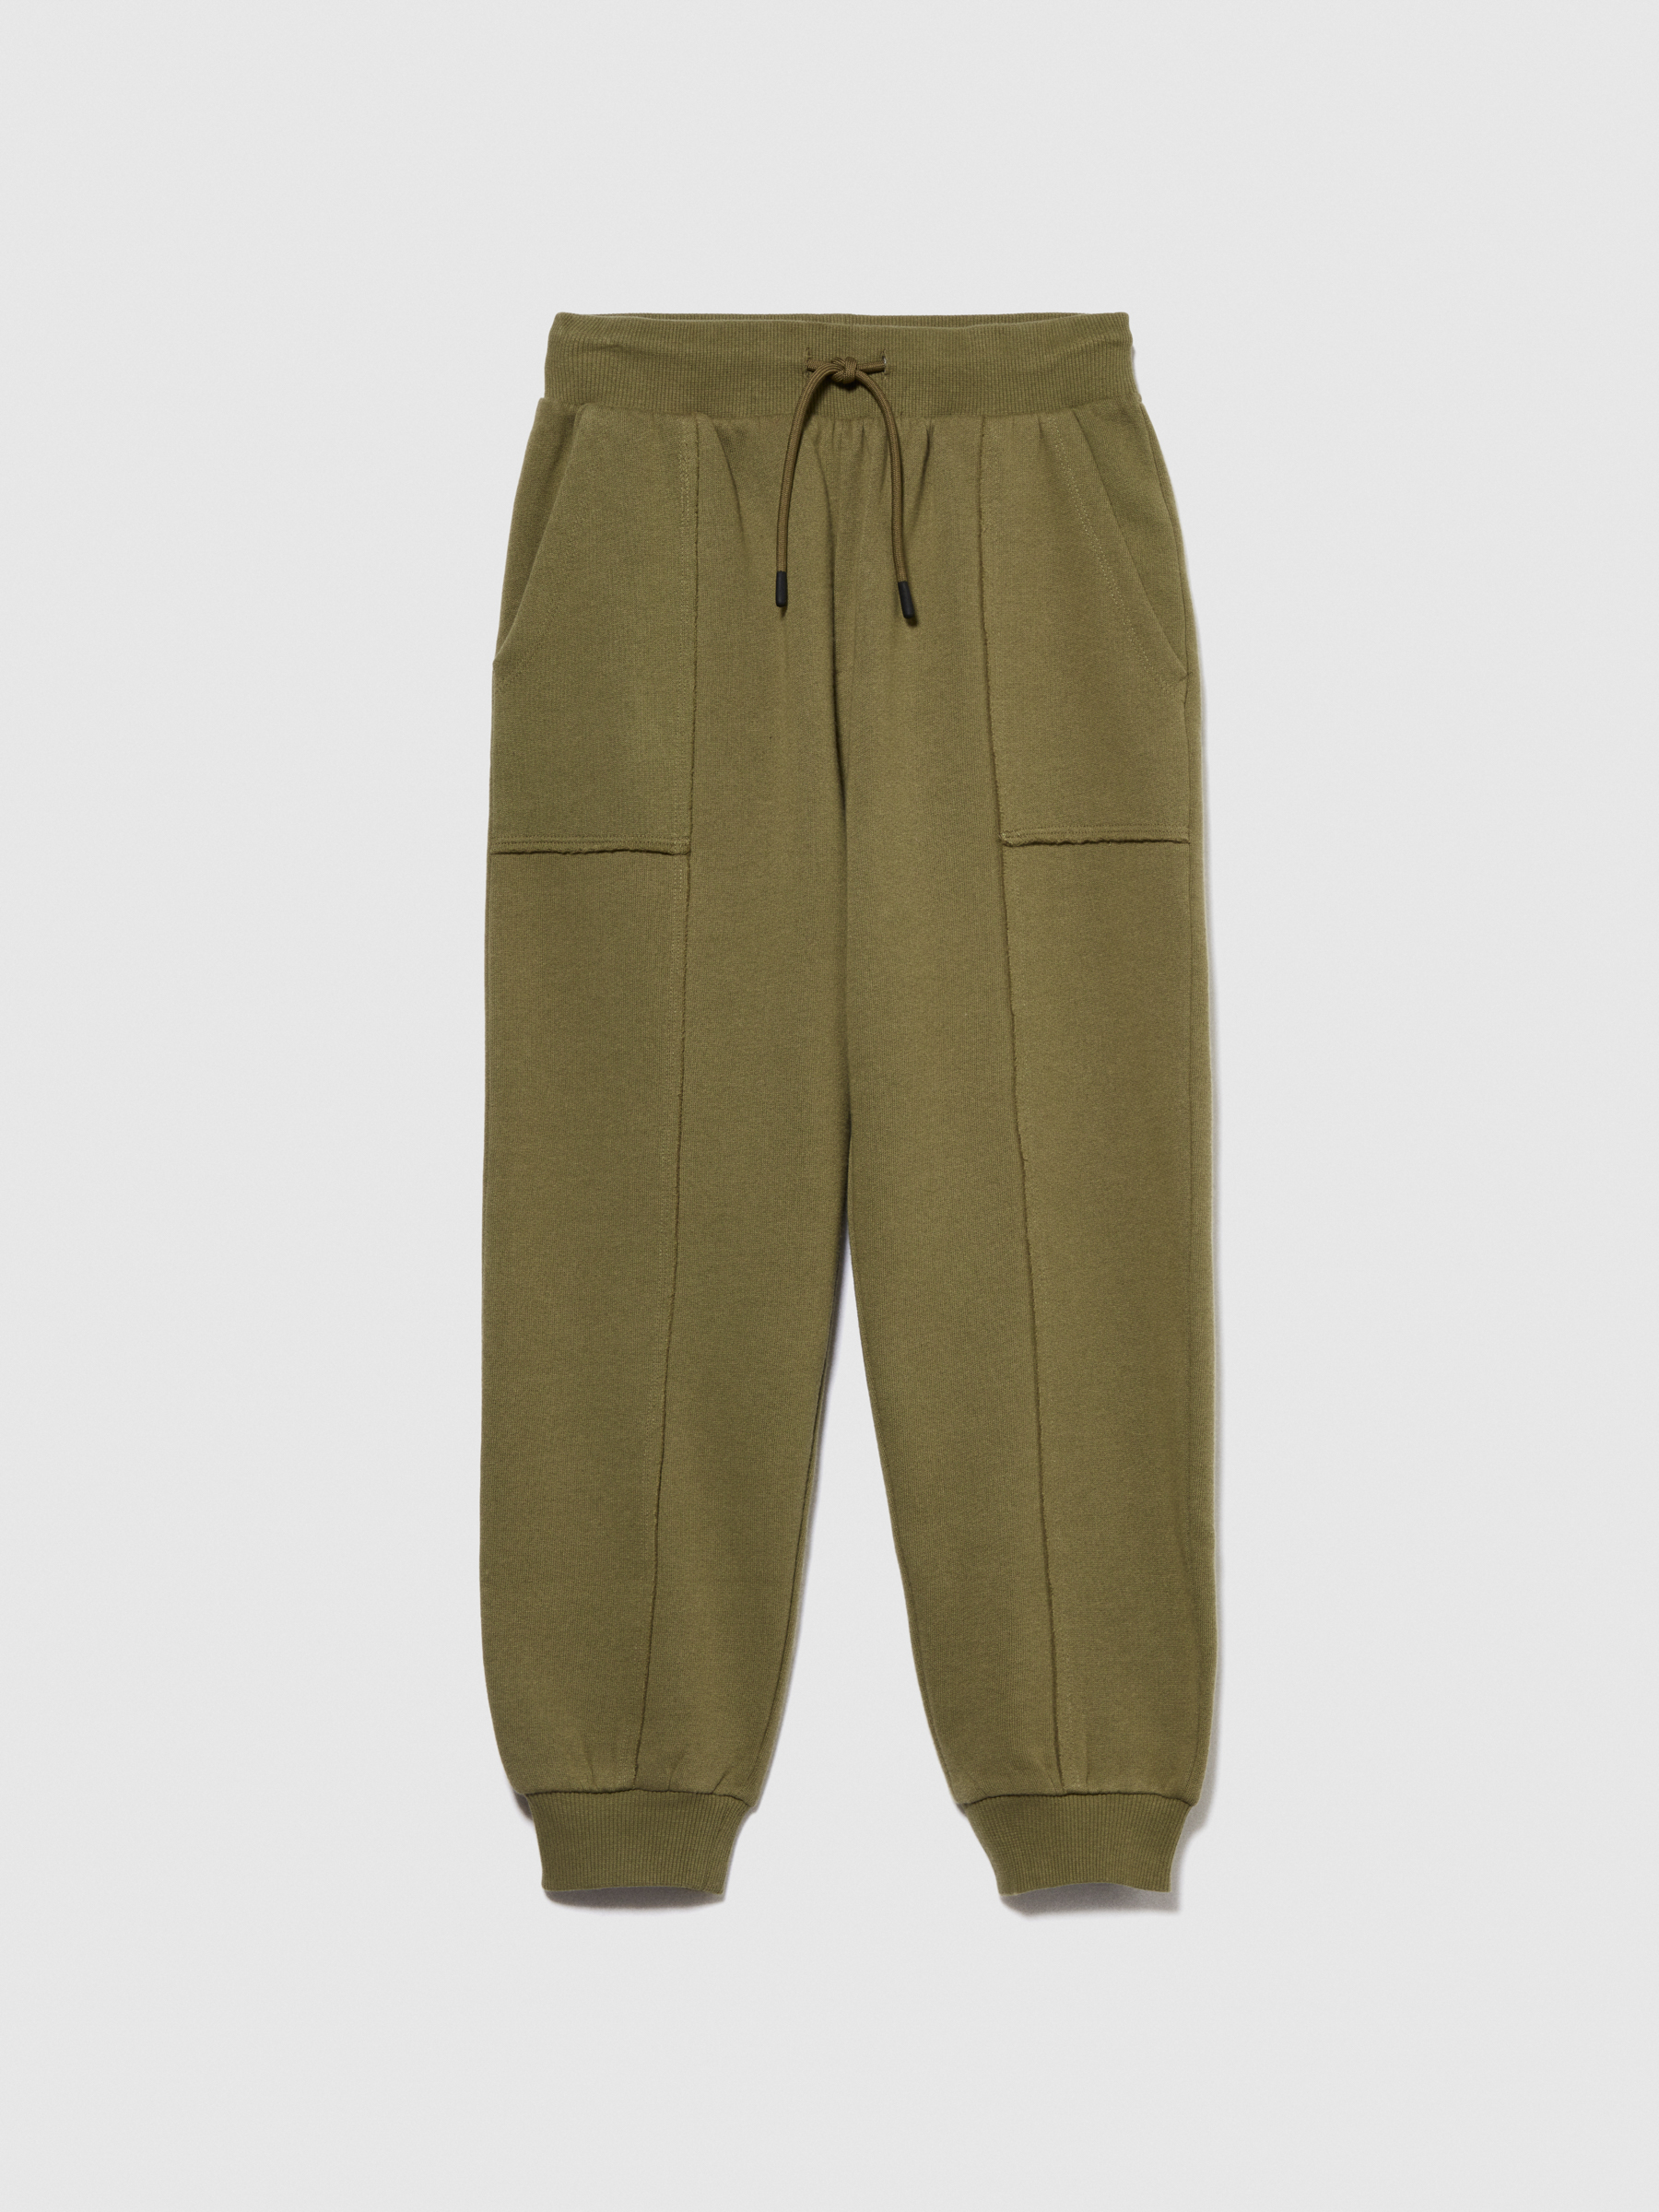 Sisley Young - Oversized Sweat Joggers, Man, Military Green, Size: L